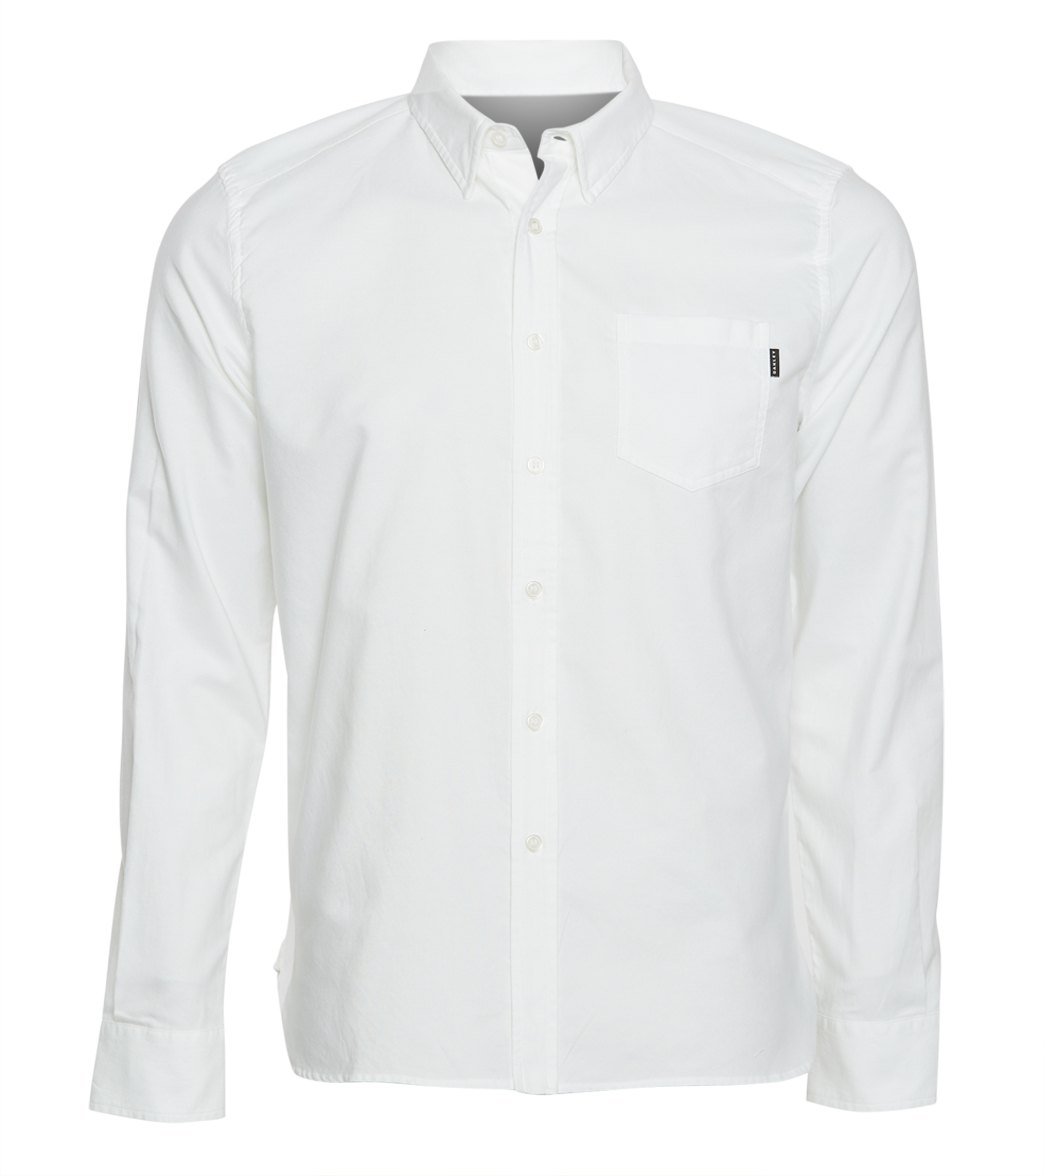 Oakley Oxford Long Sleeve Shirt at SwimOutlet.com - Free Shipping